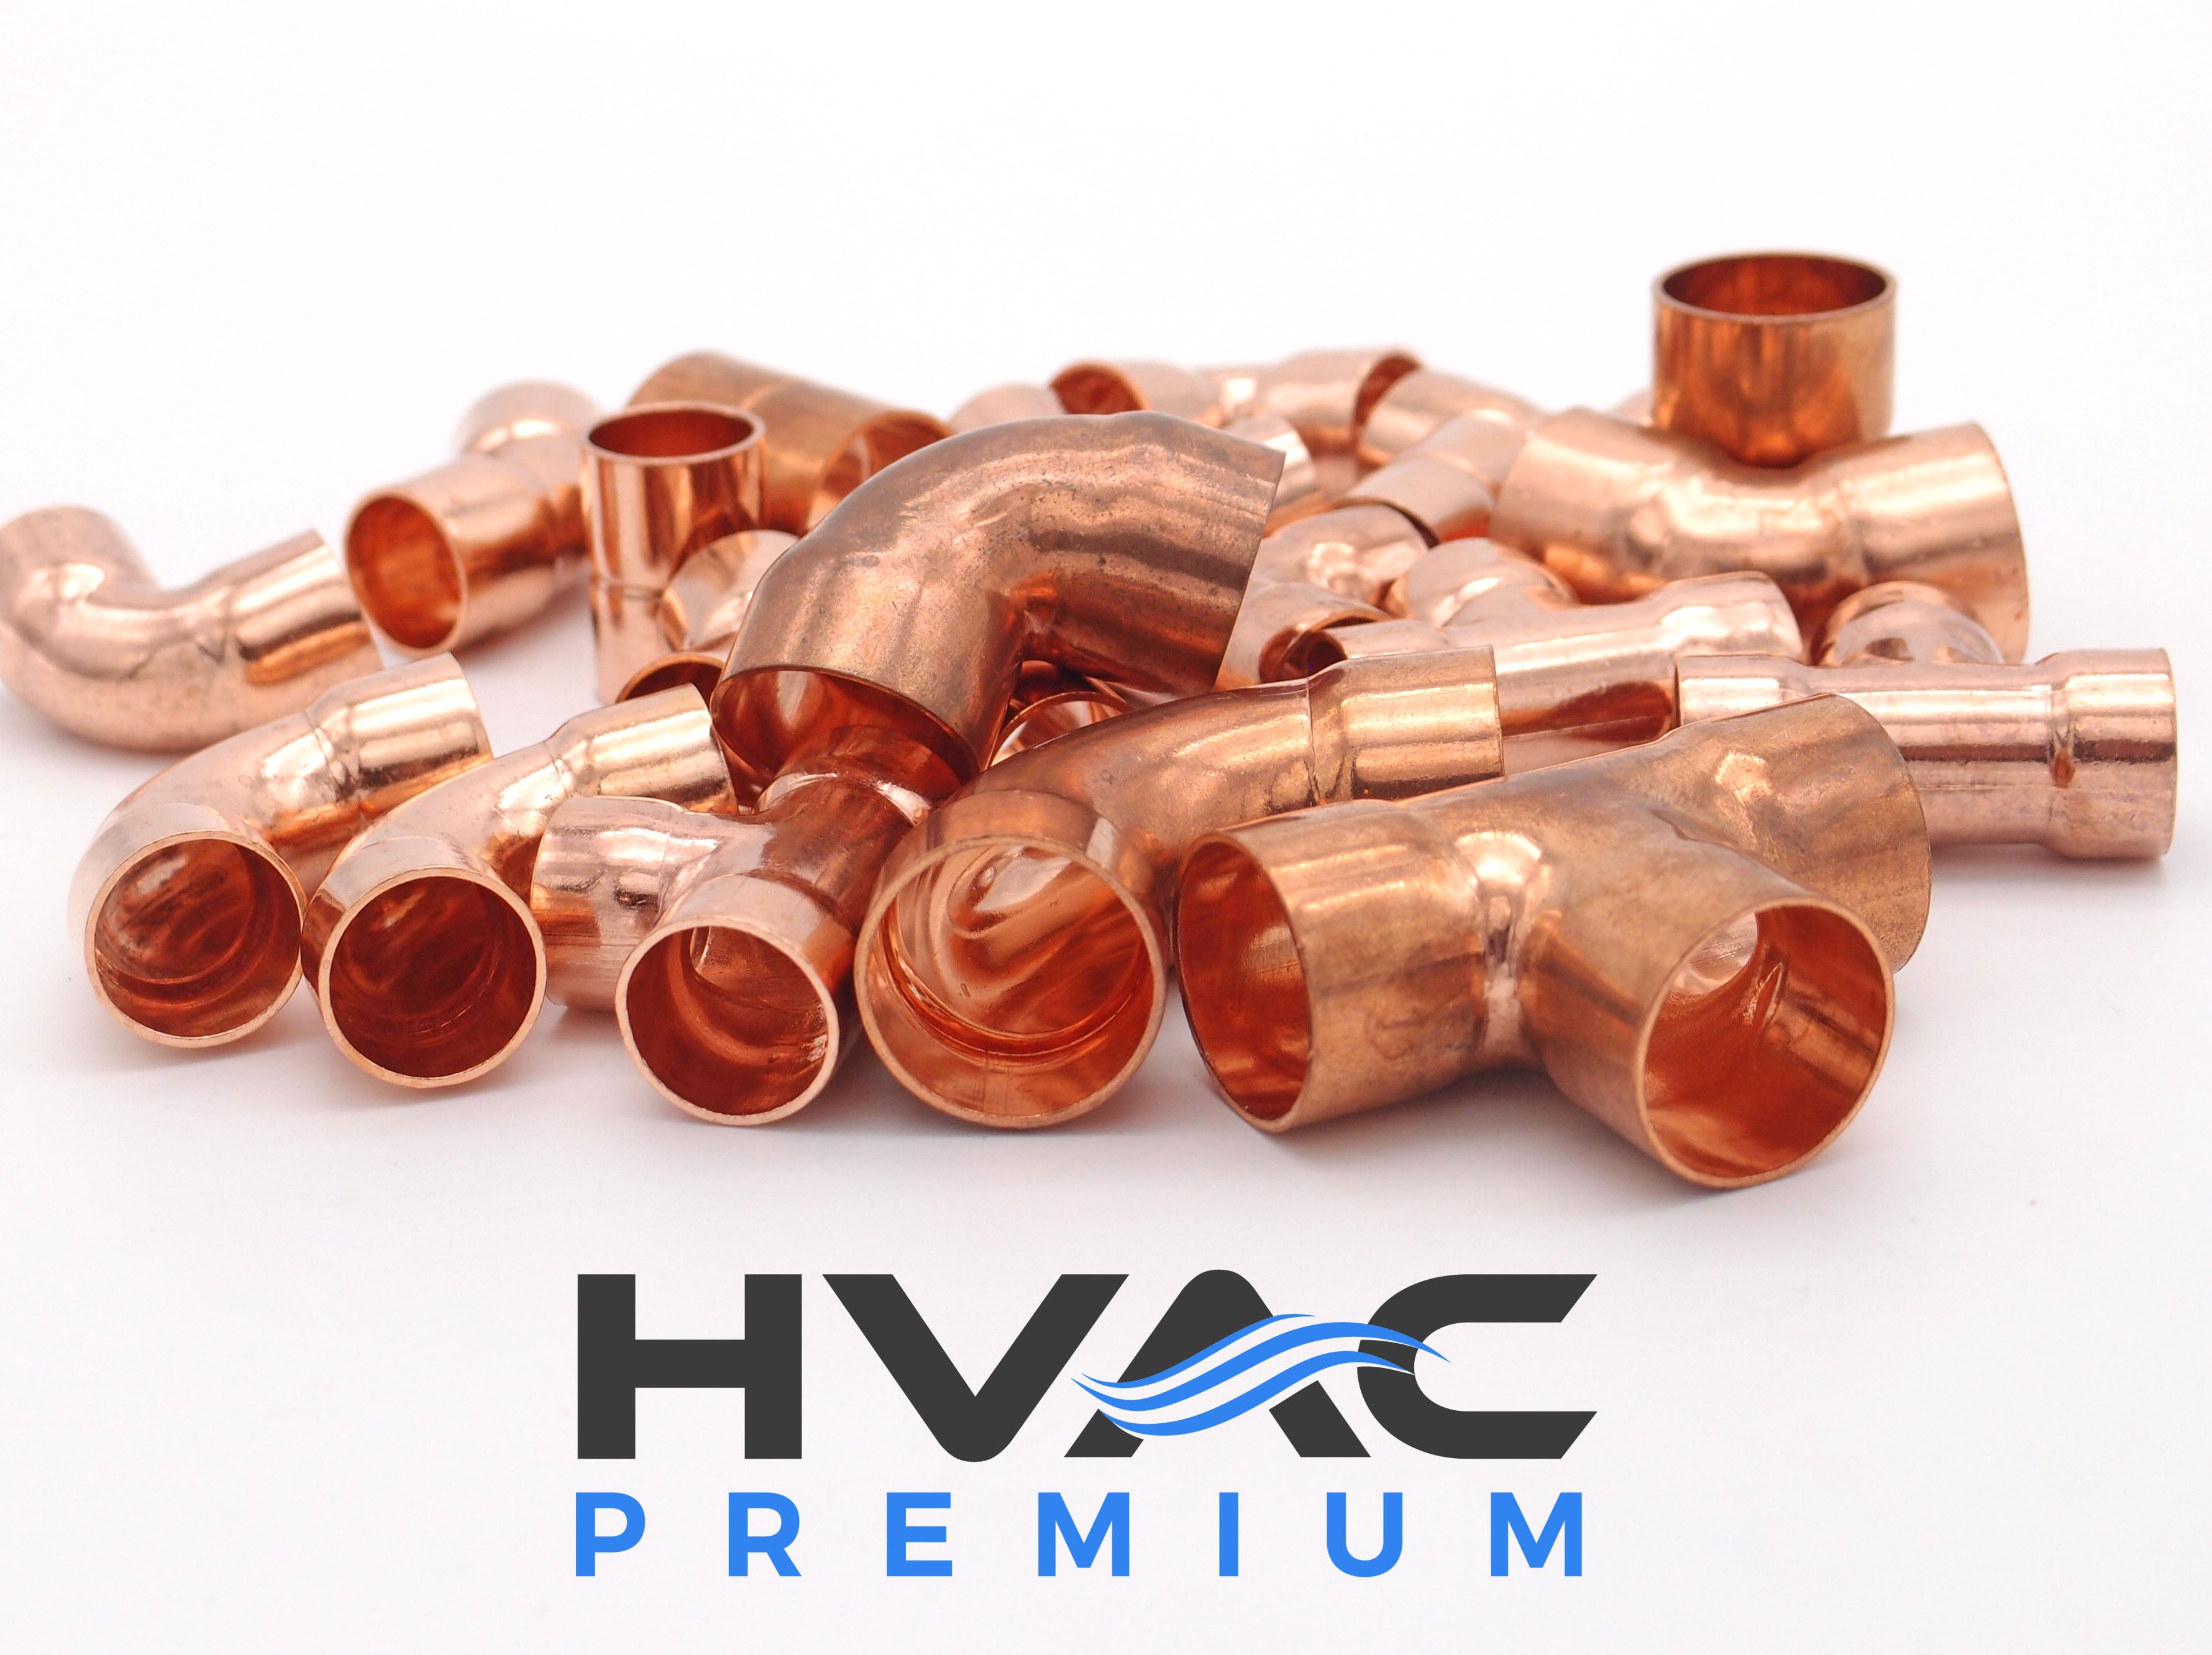 Copper Fitting 3/4 Inch (HVAC Outer Dimension) 5/8 Inch (Plumbing Inner Dimension) - Copper Tee & HVAC – 99.9% Pure Copper - 10 Pack